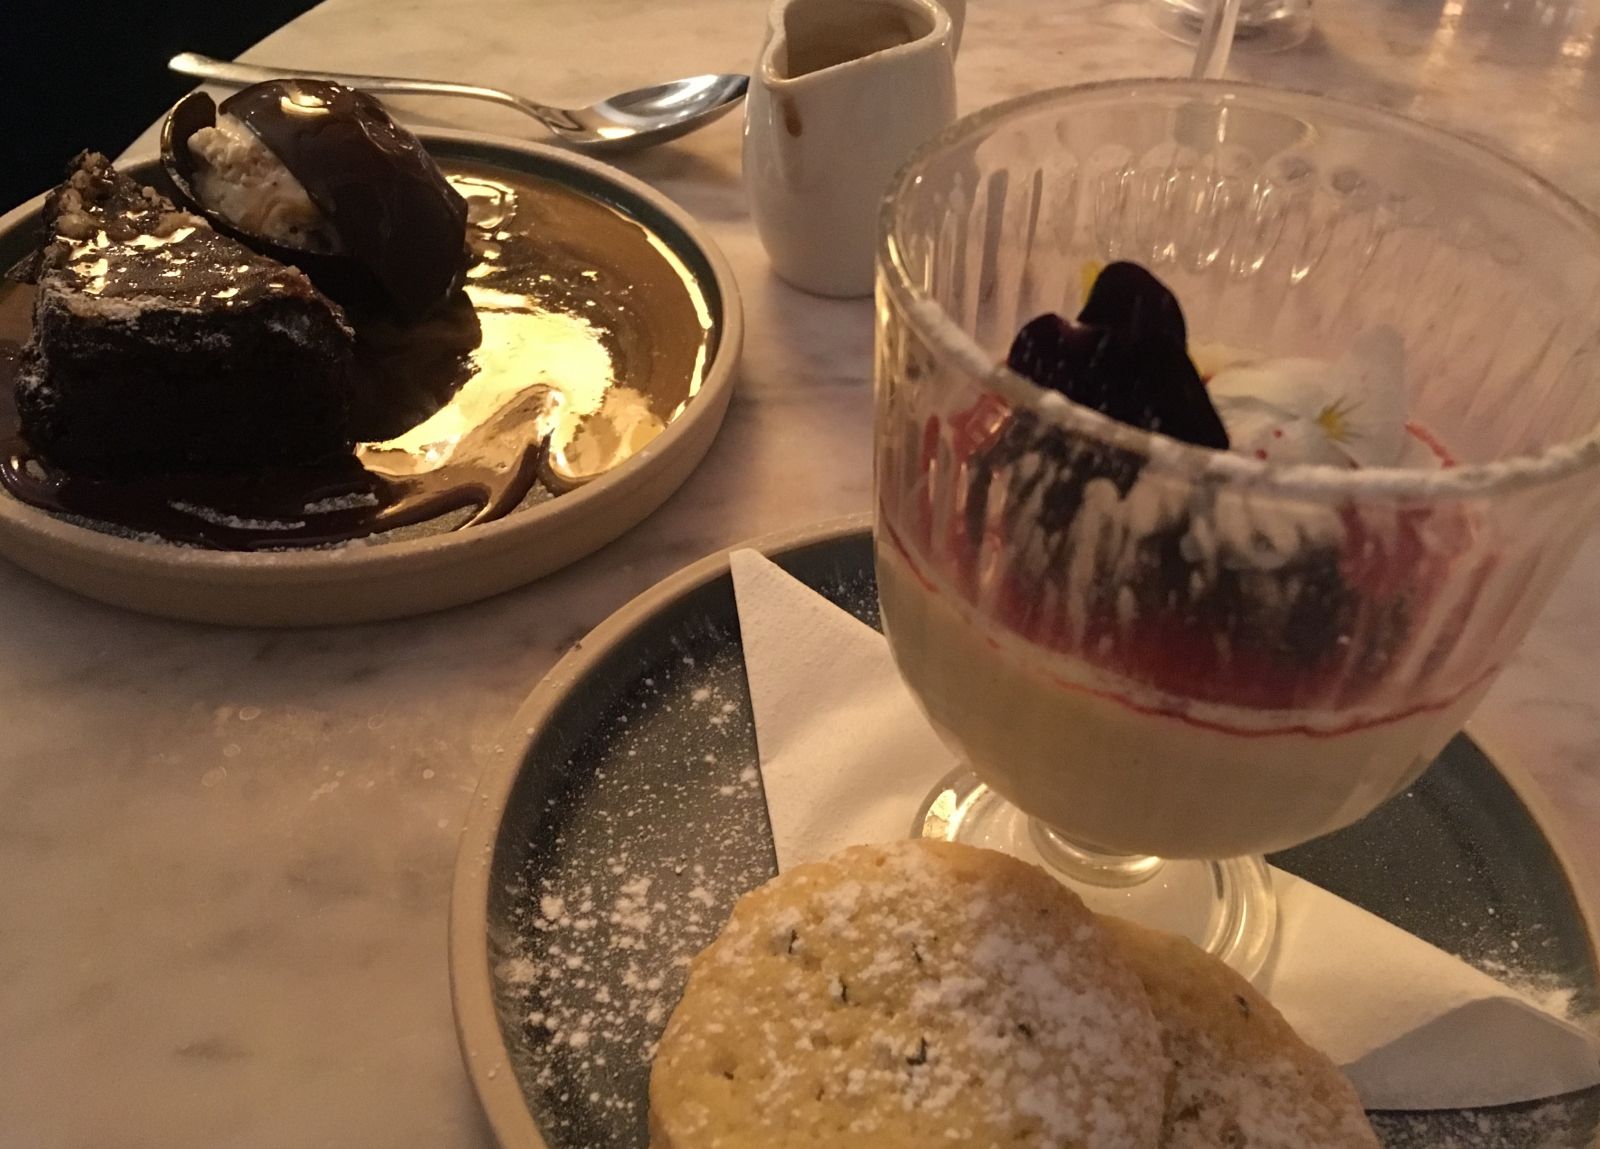 Lemon posset with mixed berry compote and chocolate dome with hazelnut torte at Aqua.